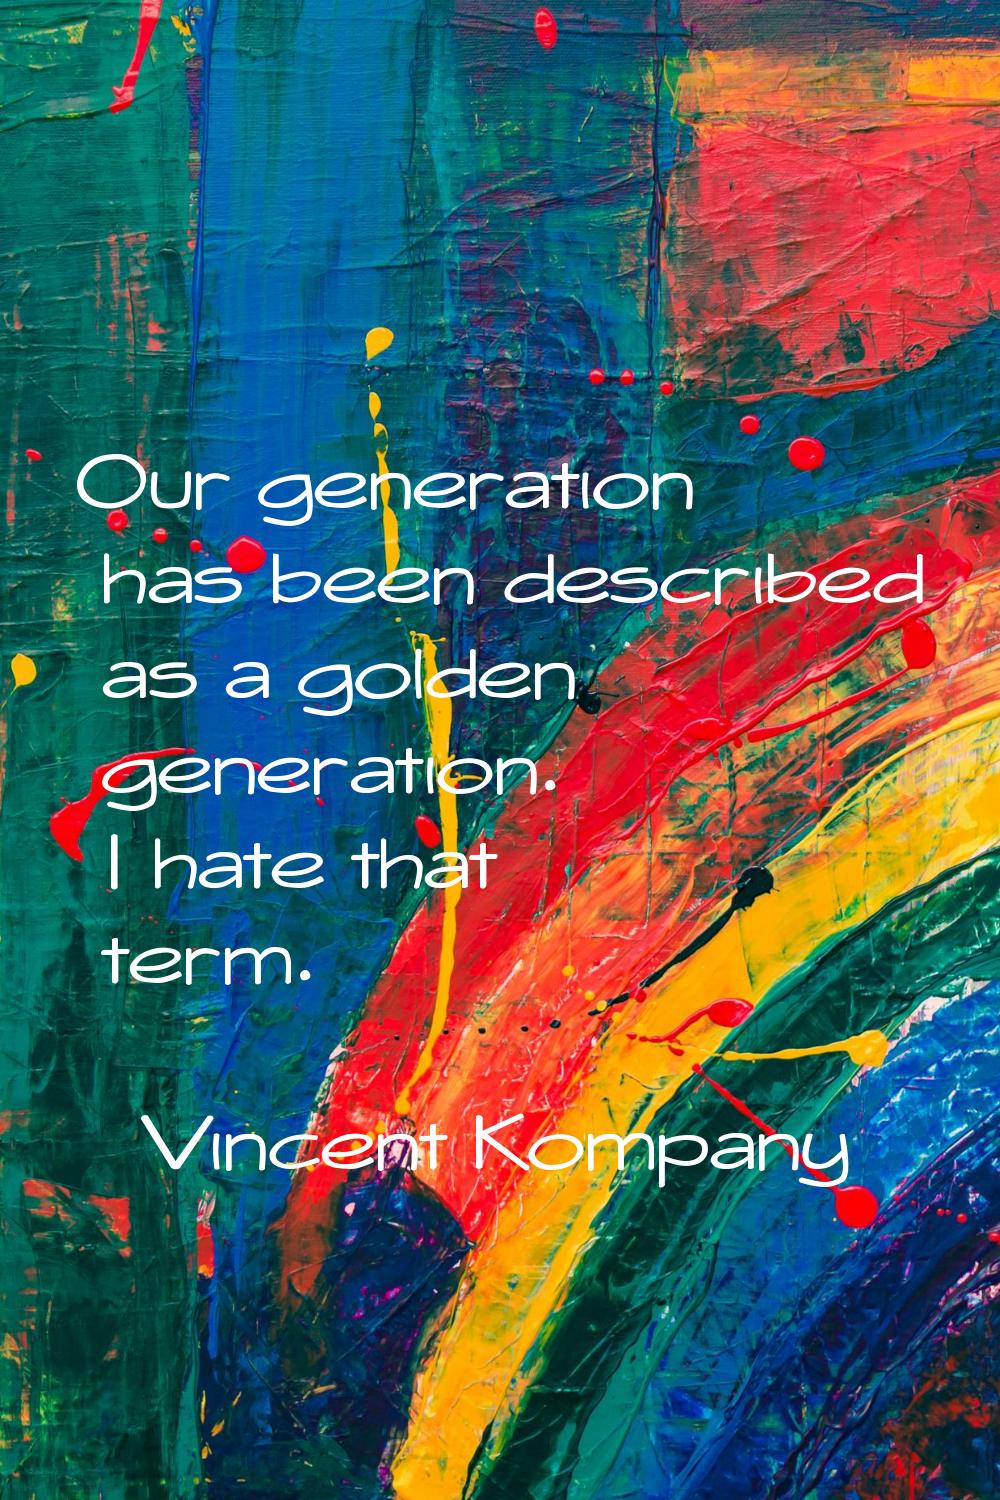 Our generation has been described as a golden generation. I hate that term.